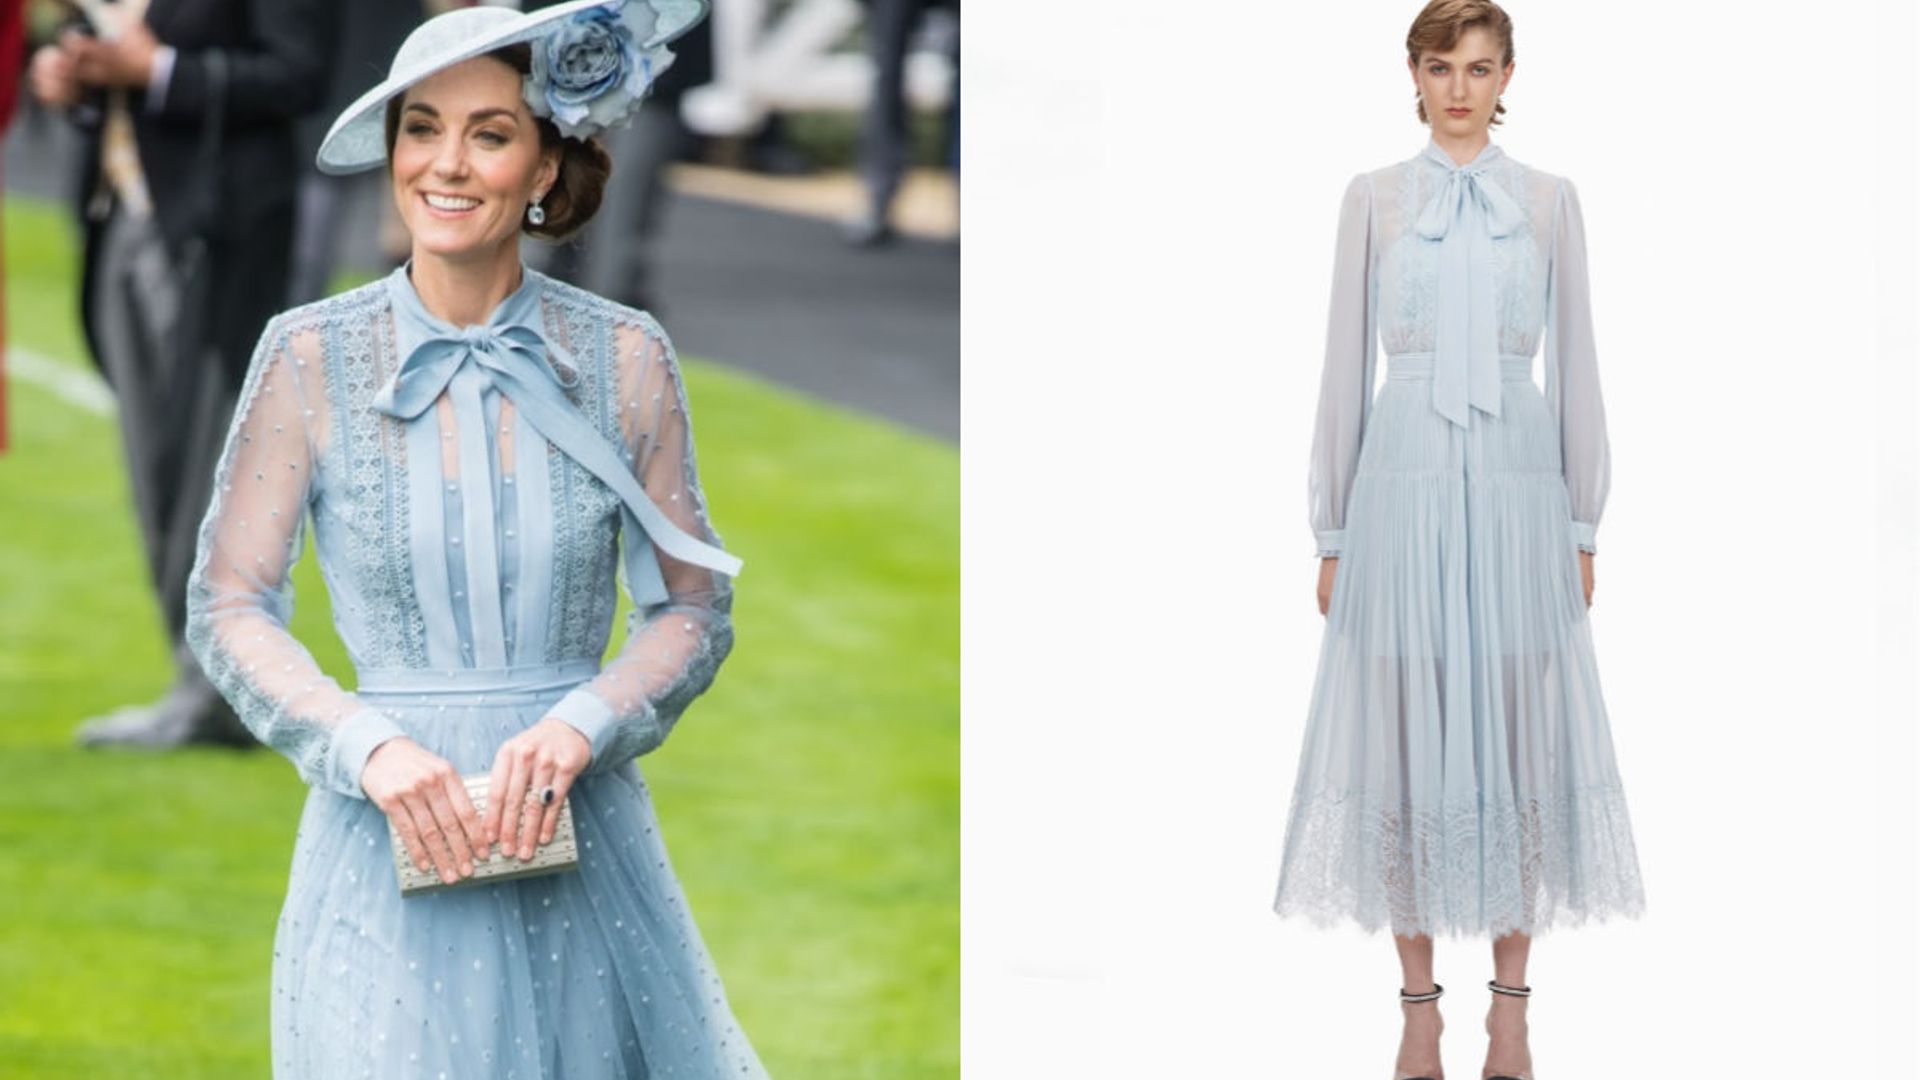 Still dreaming of Kate Middleton's blue Ascot dress? You'll love Self-Portrait's newest design